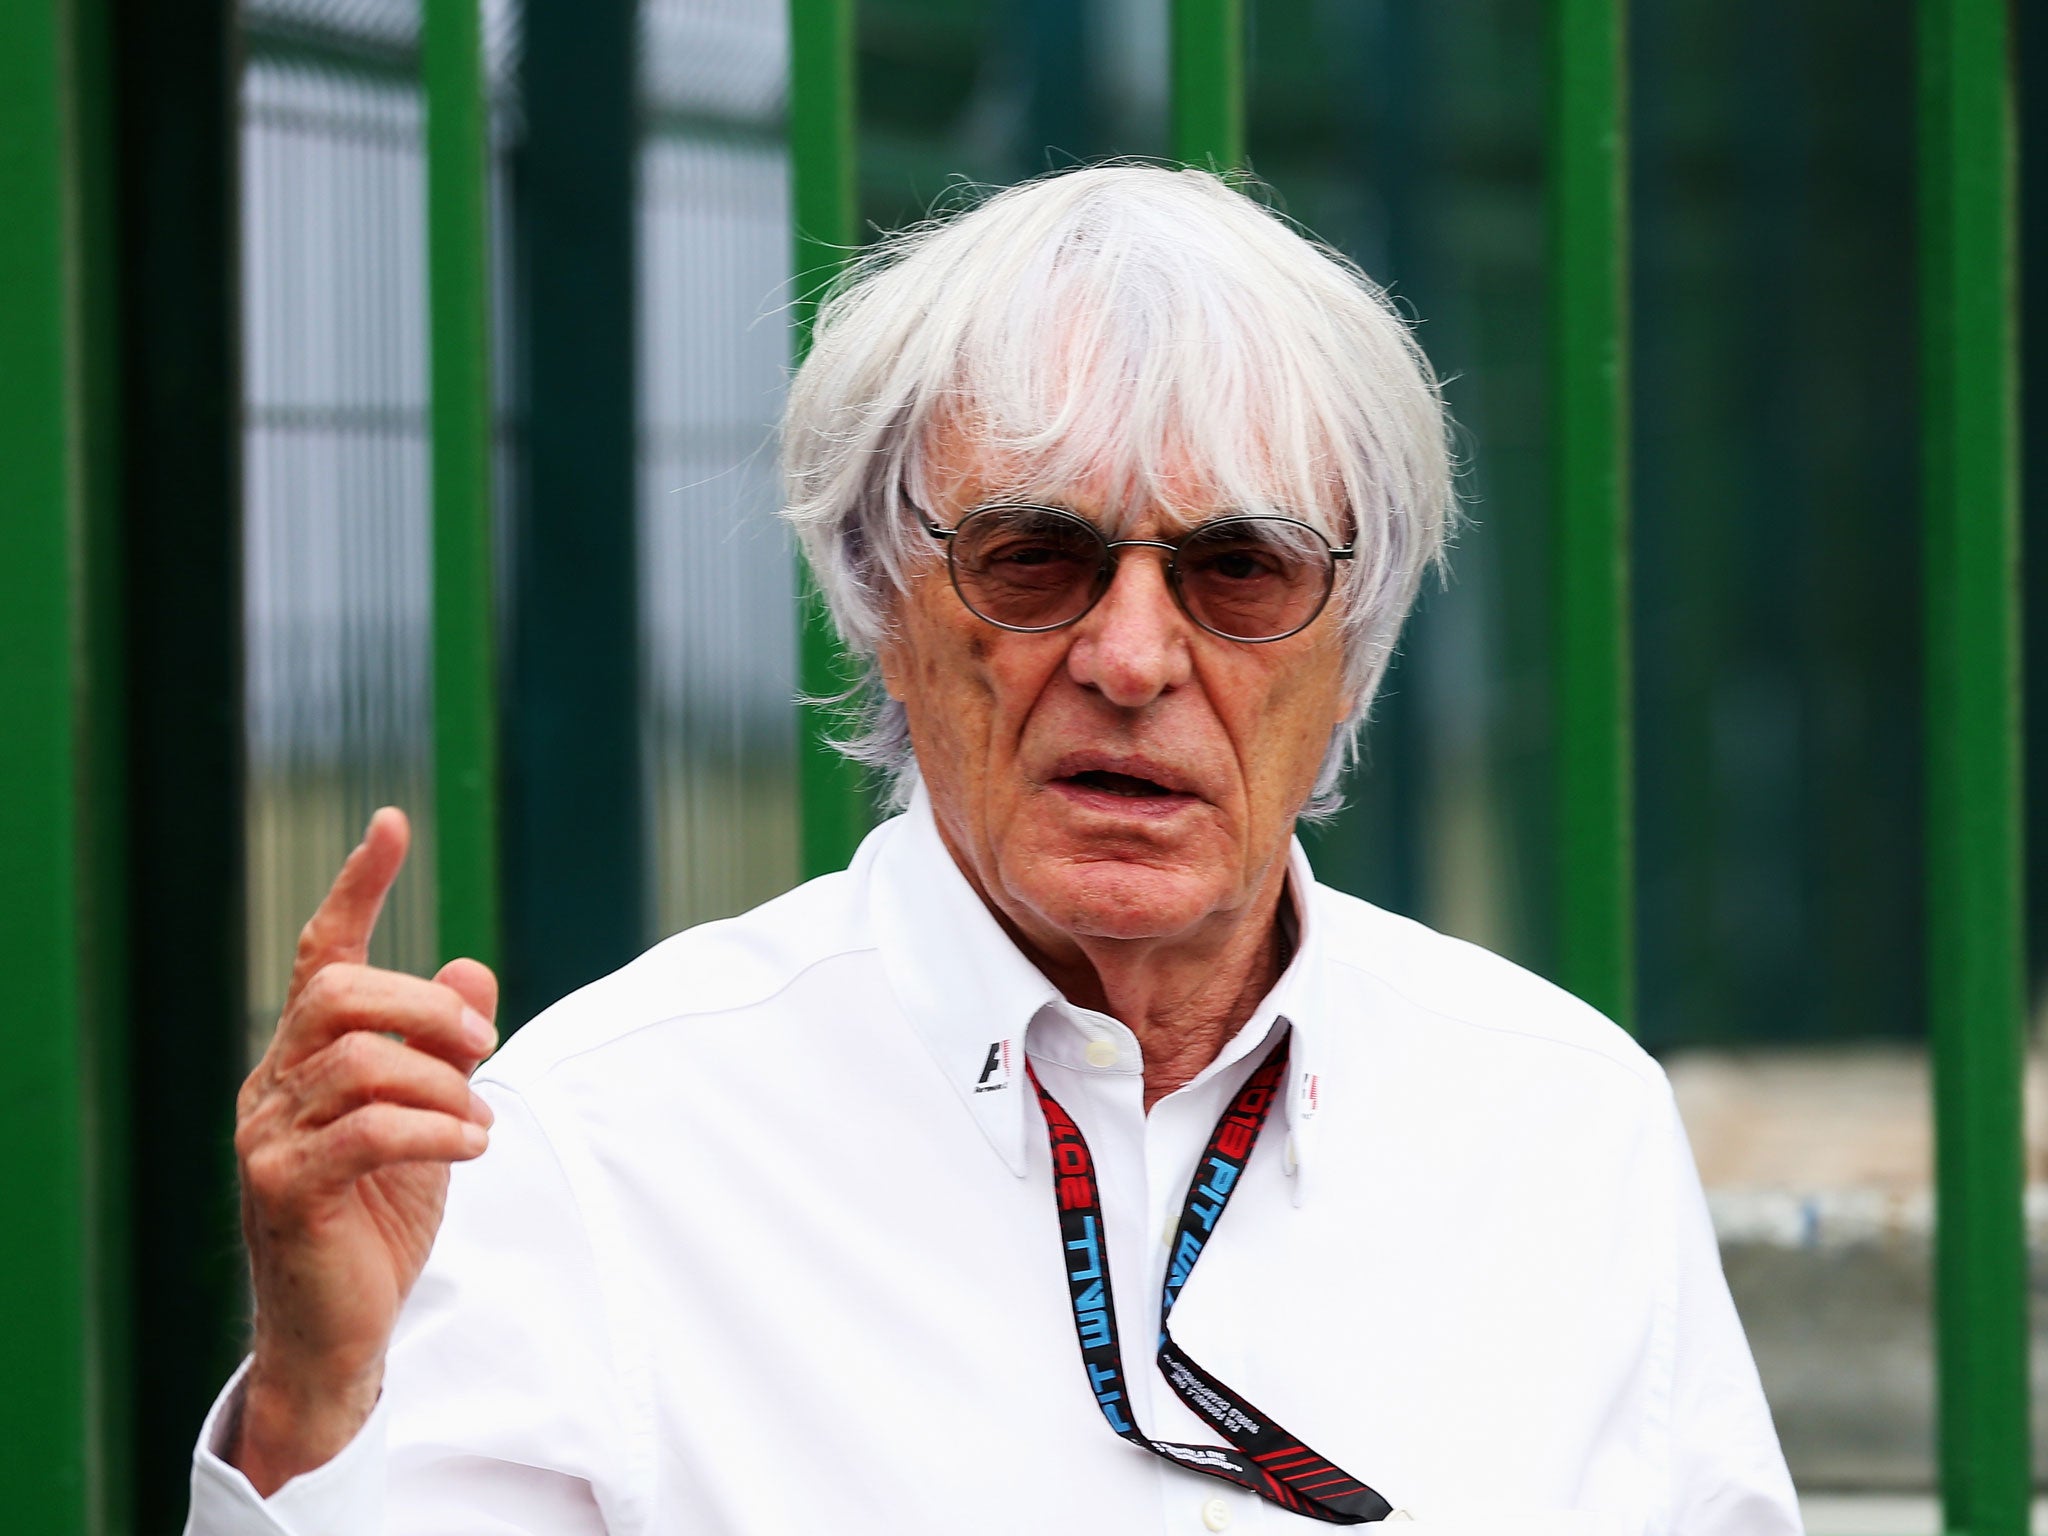 Mr Justice Newey said that Ecclestone, 83, had paid a bribe over a sale of F1 shares.